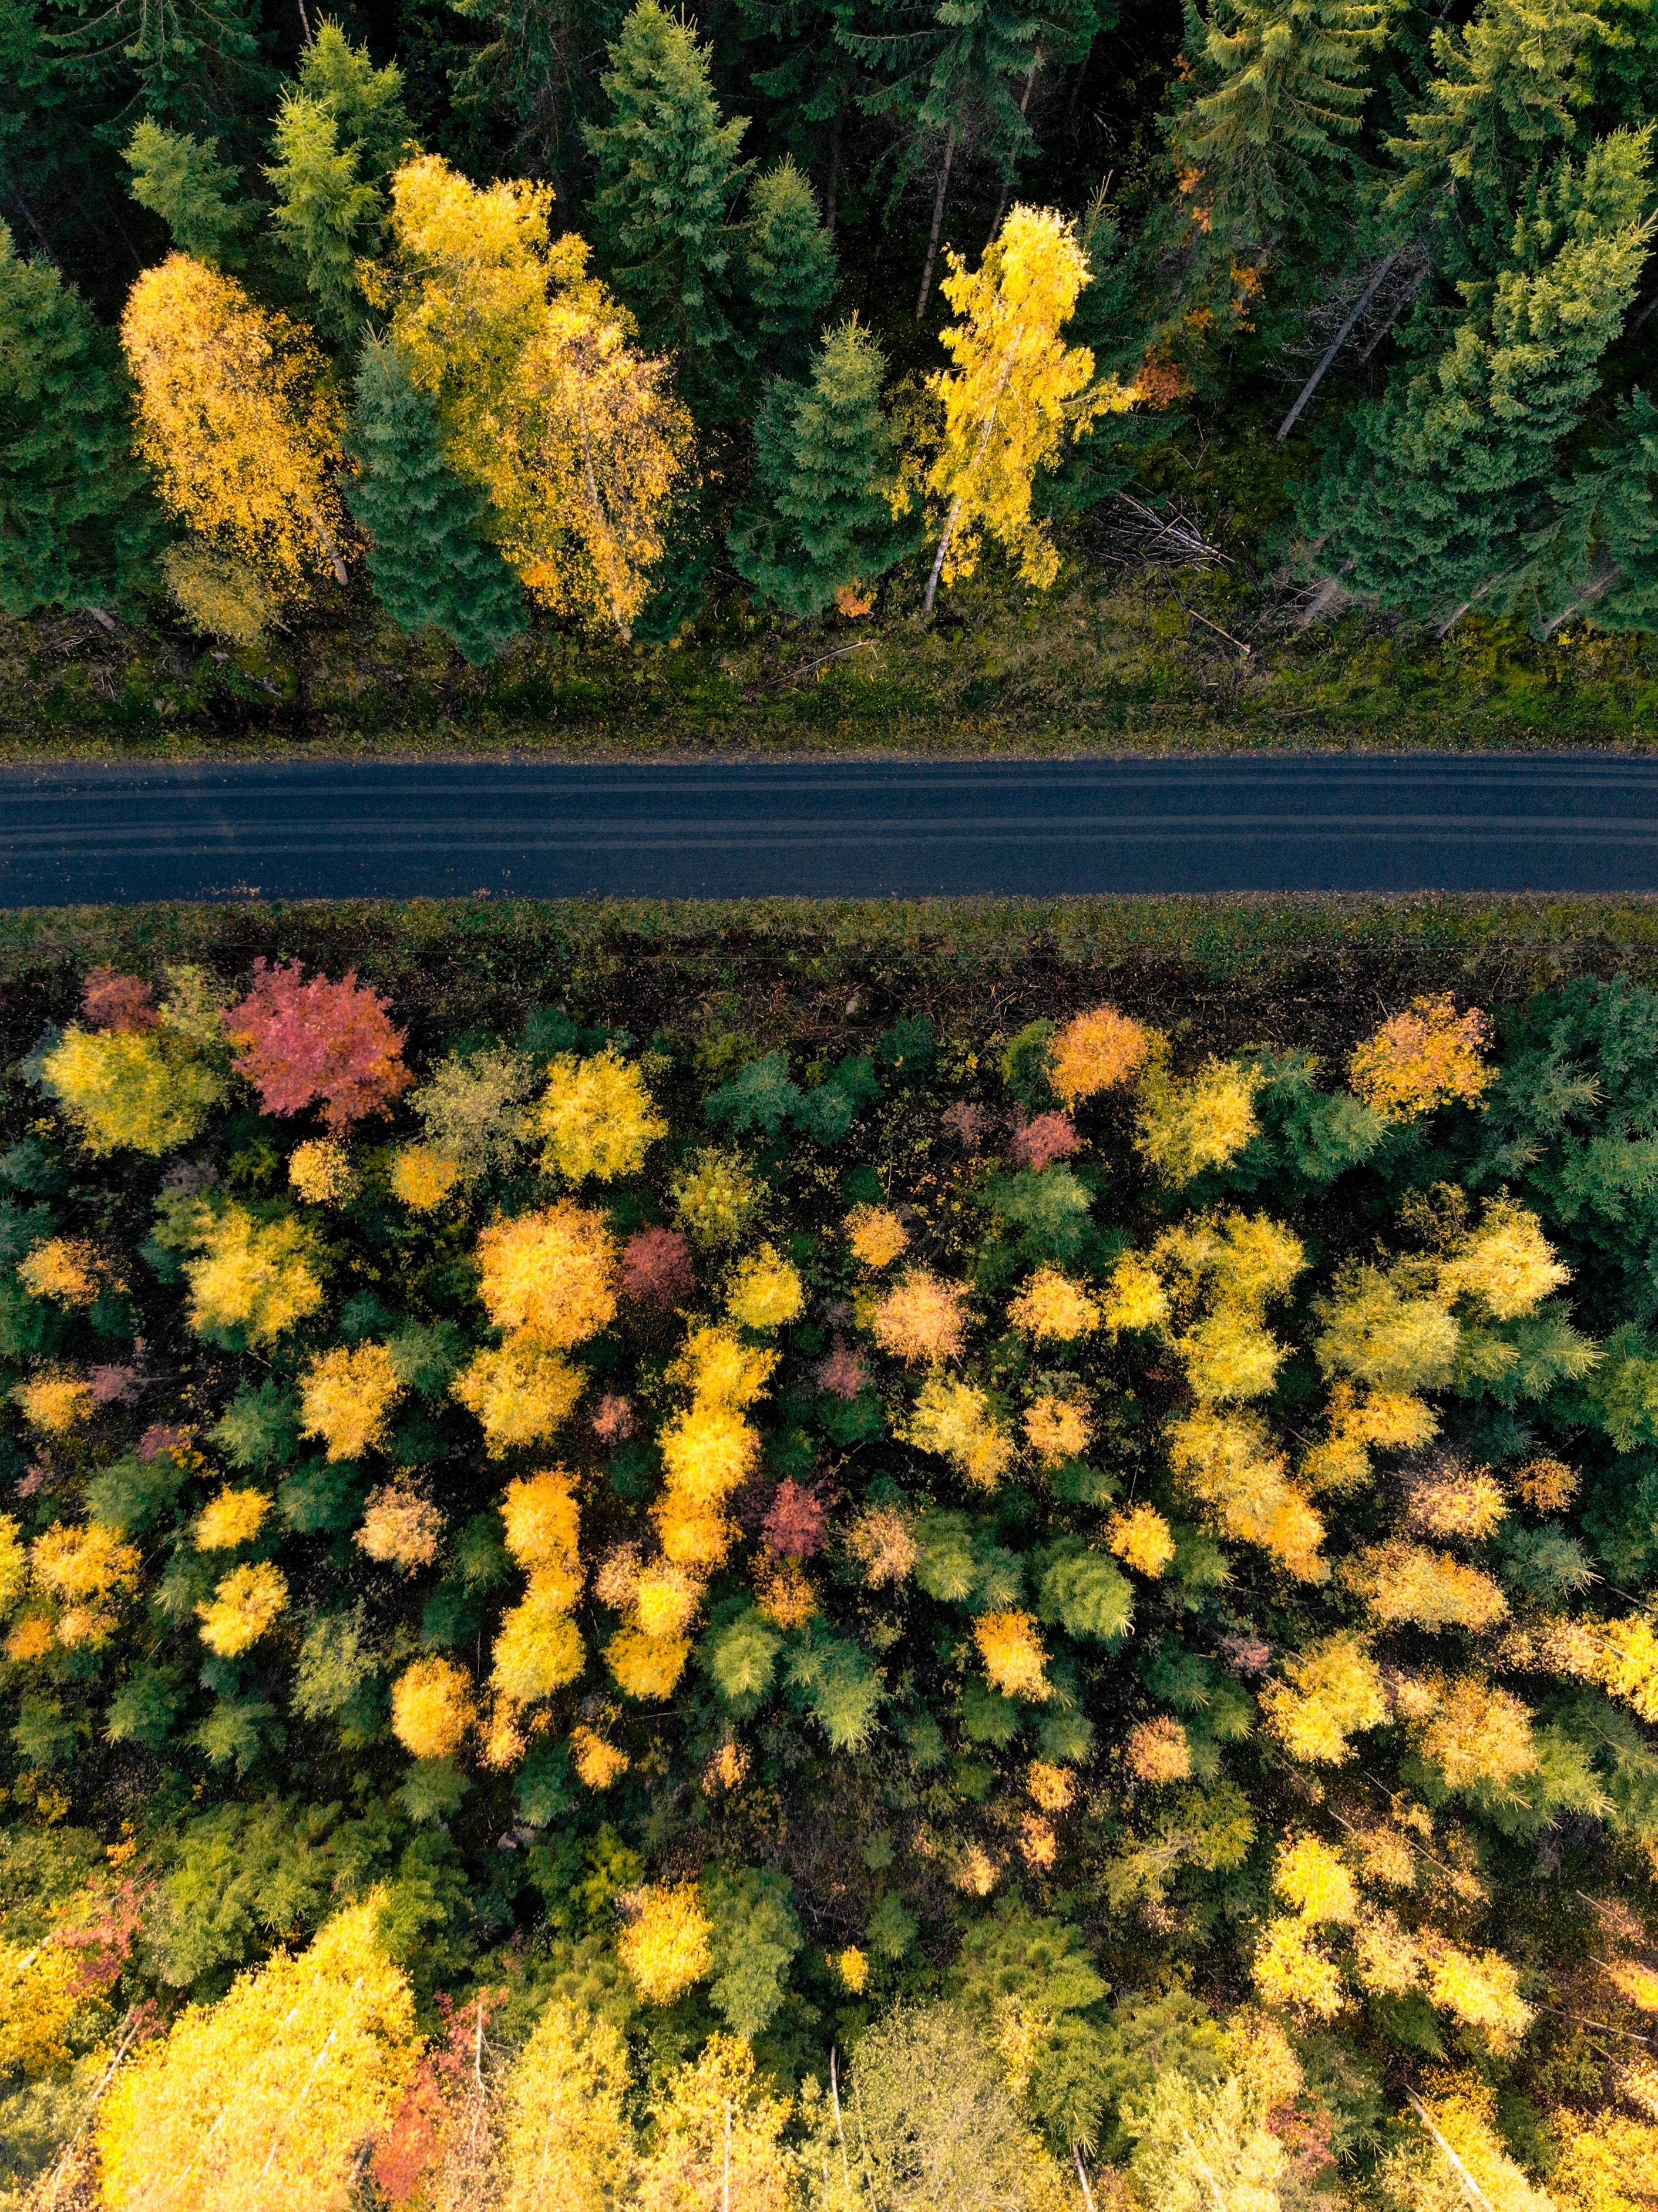 Windows Backgrounds autumn, nature, trees, view from above, road, forest